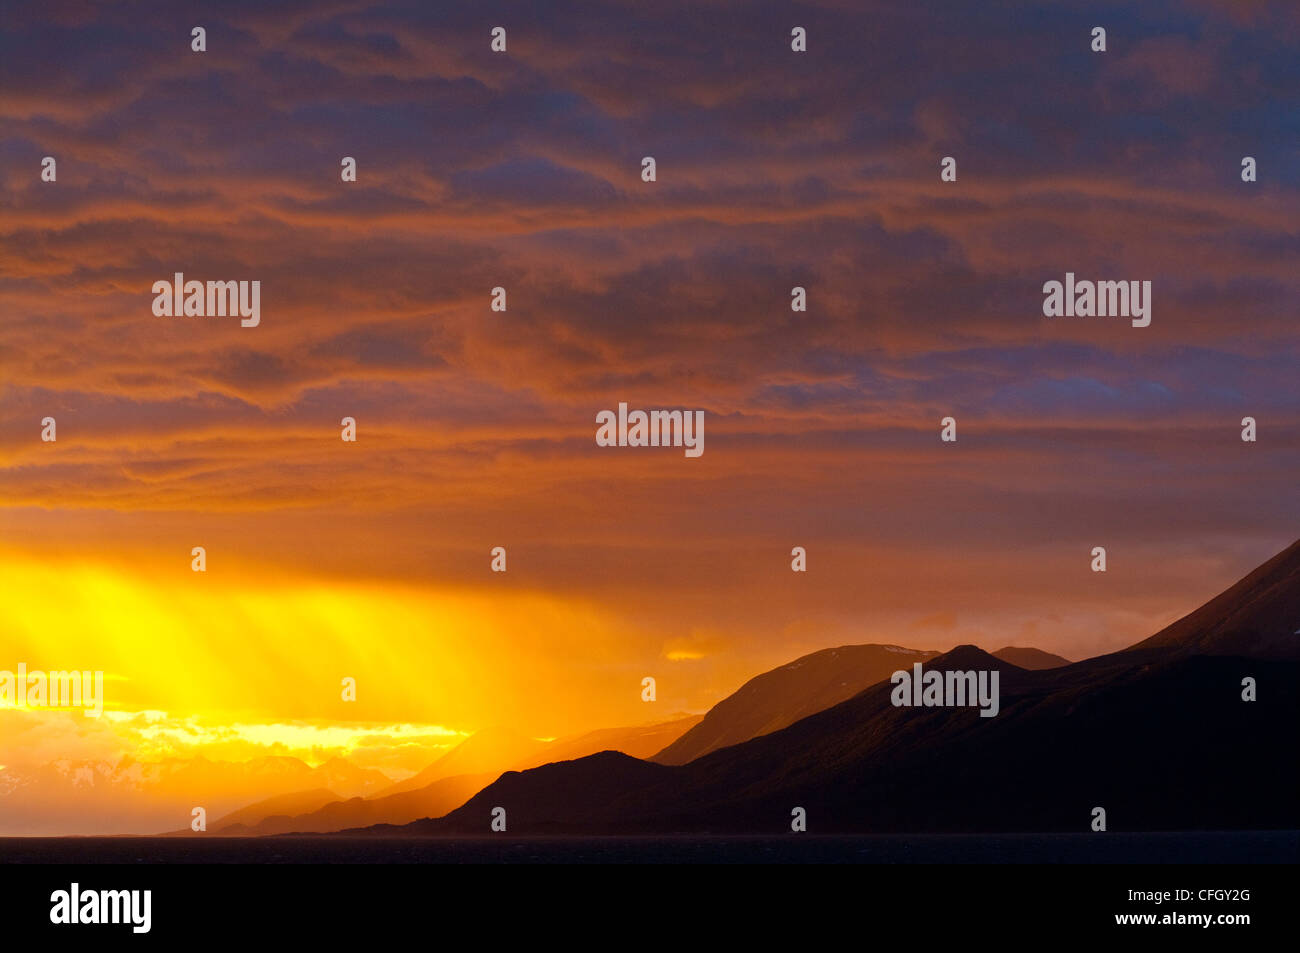 The setting sun turns a rain storm over the Andes fiery golden. Stock Photo